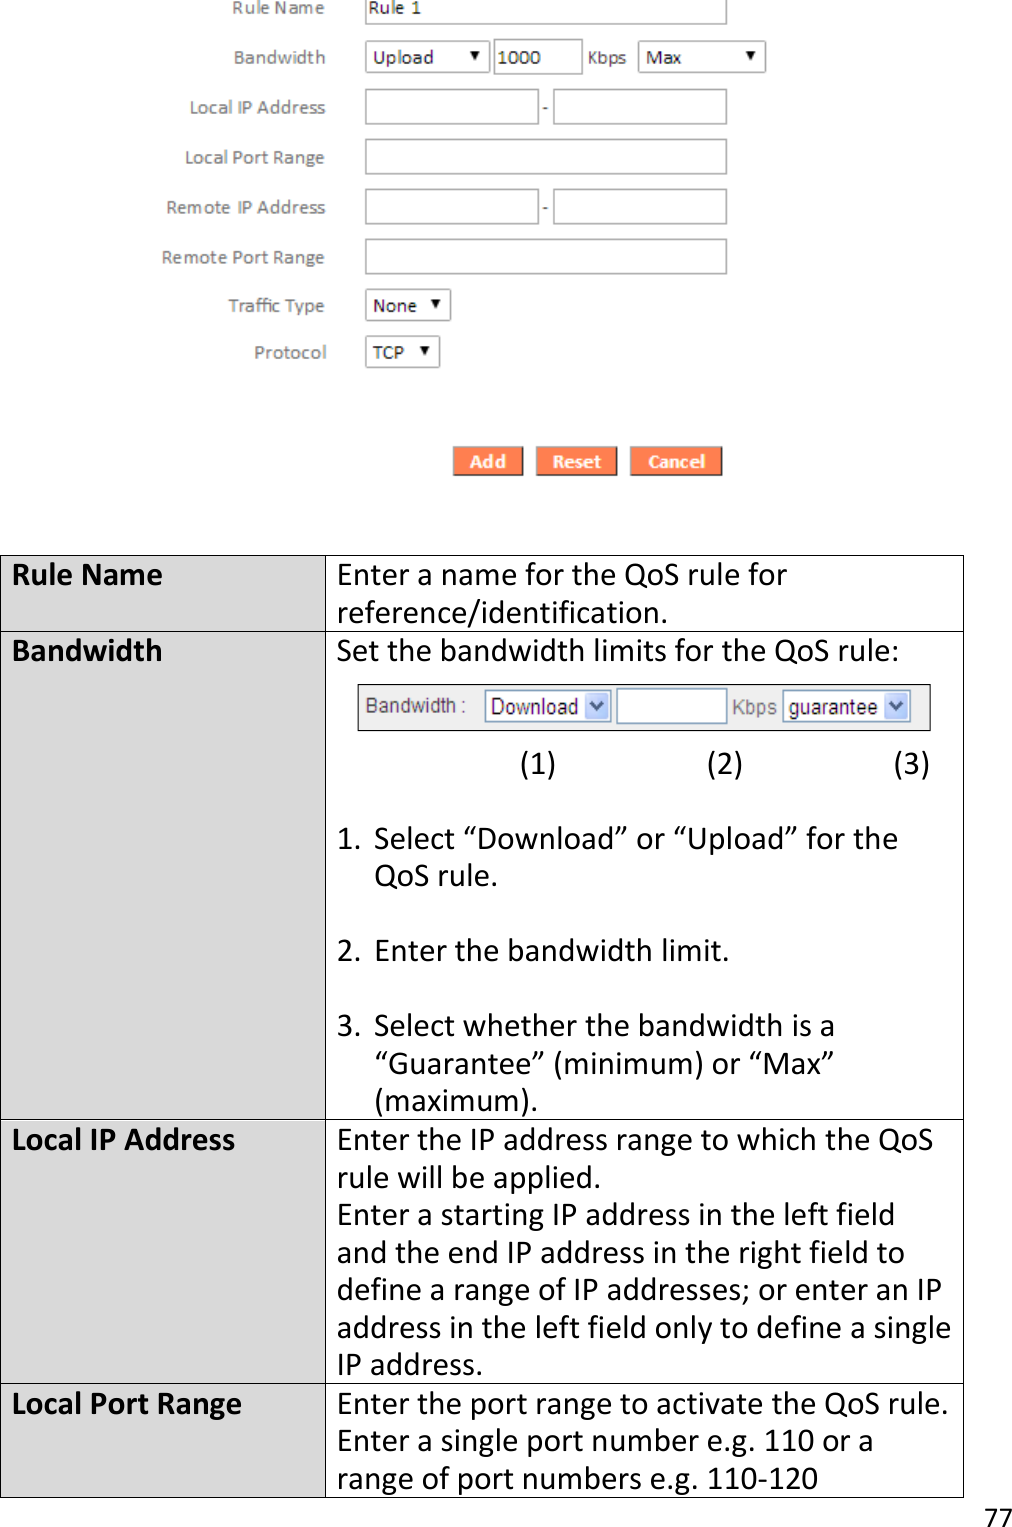 77    Rule Name Enter a name for the QoS rule for reference/identification. Bandwidth Set the bandwidth limits for the QoS rule:                        (1)                  (2)                  (3)  1. Select “Download” or “Upload” for the QoS rule.  2. Enter the bandwidth limit.  3. Select whether the bandwidth is a “Guarantee” (minimum) or “Max” (maximum). Local IP Address Enter the IP address range to which the QoS rule will be applied. Enter a starting IP address in the left field and the end IP address in the right field to define a range of IP addresses; or enter an IP address in the left field only to define a single IP address. Local Port Range Enter the port range to activate the QoS rule. Enter a single port number e.g. 110 or a range of port numbers e.g. 110-120 